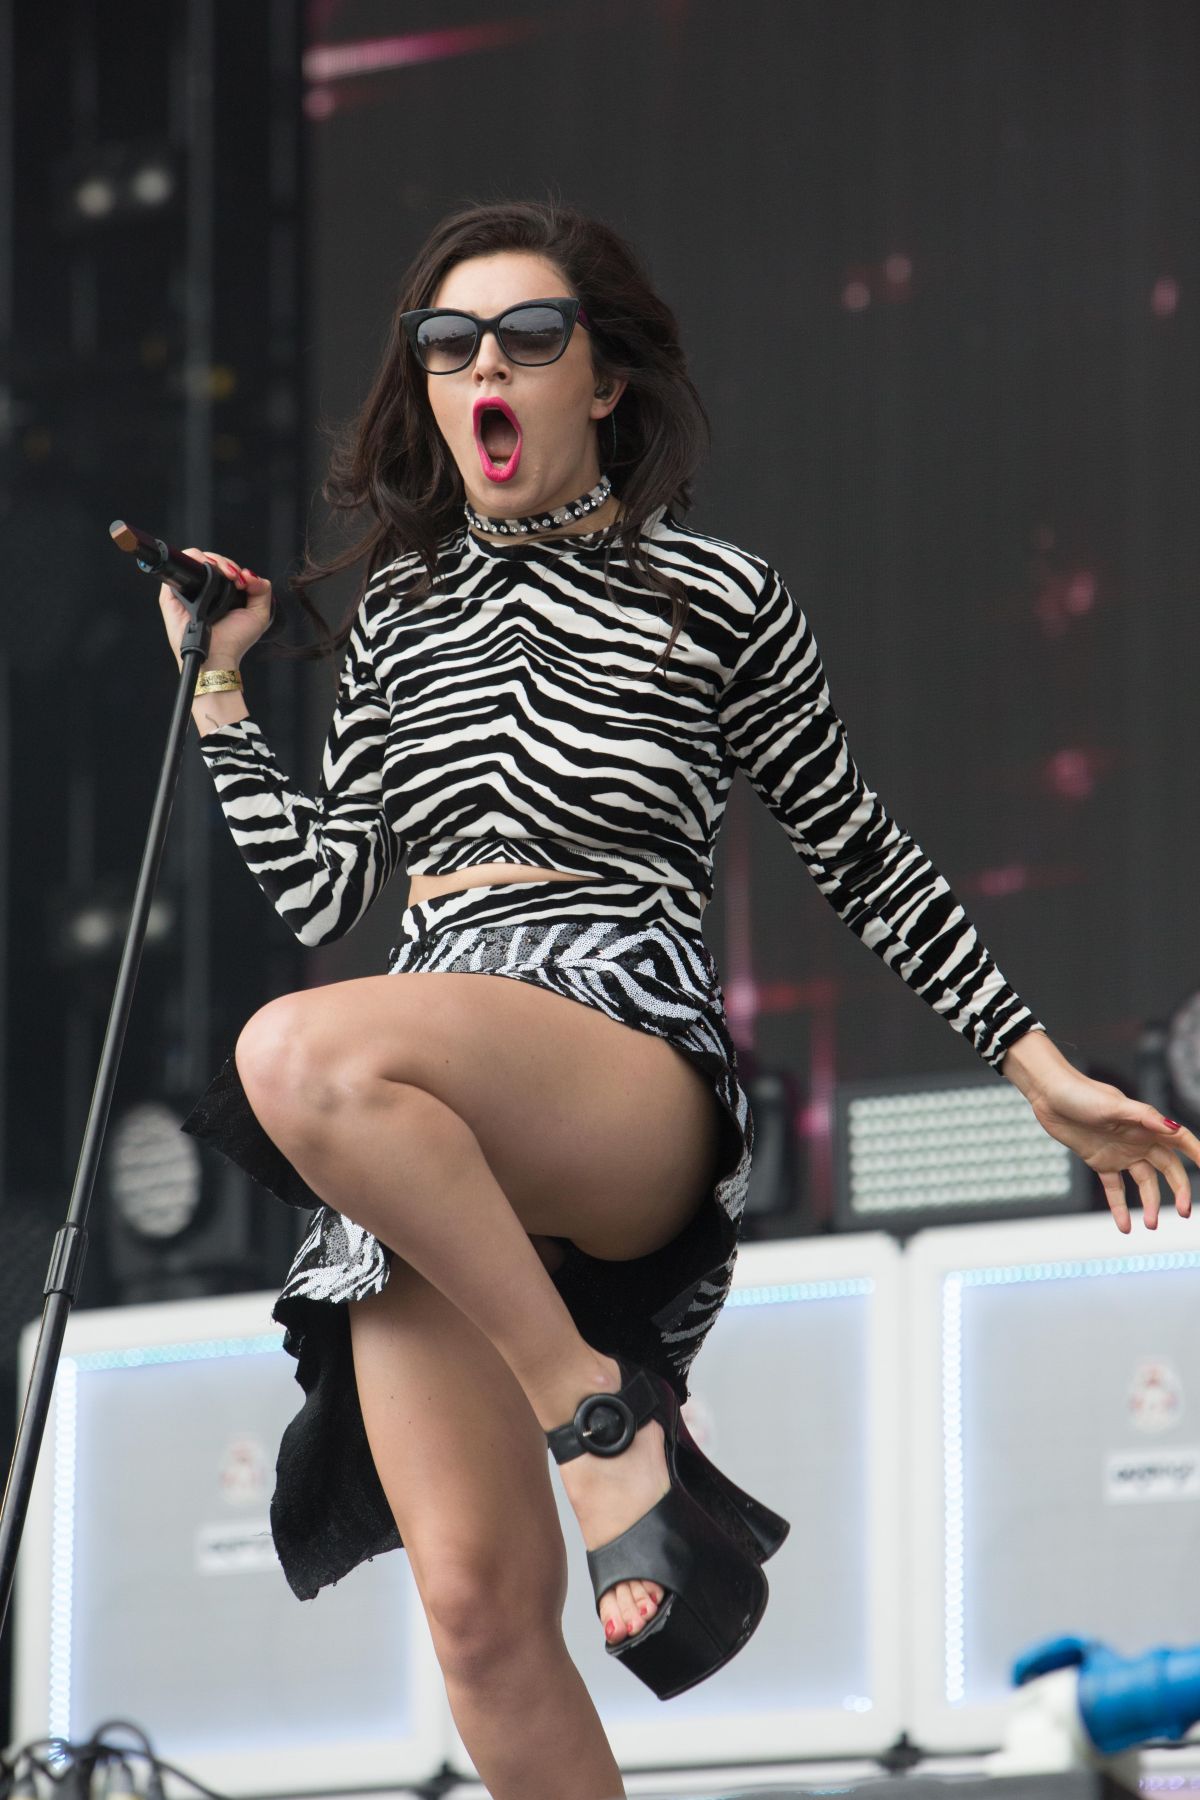 CHARLI XCX Performs at BBC Radio 1’s Big Weekend in London.